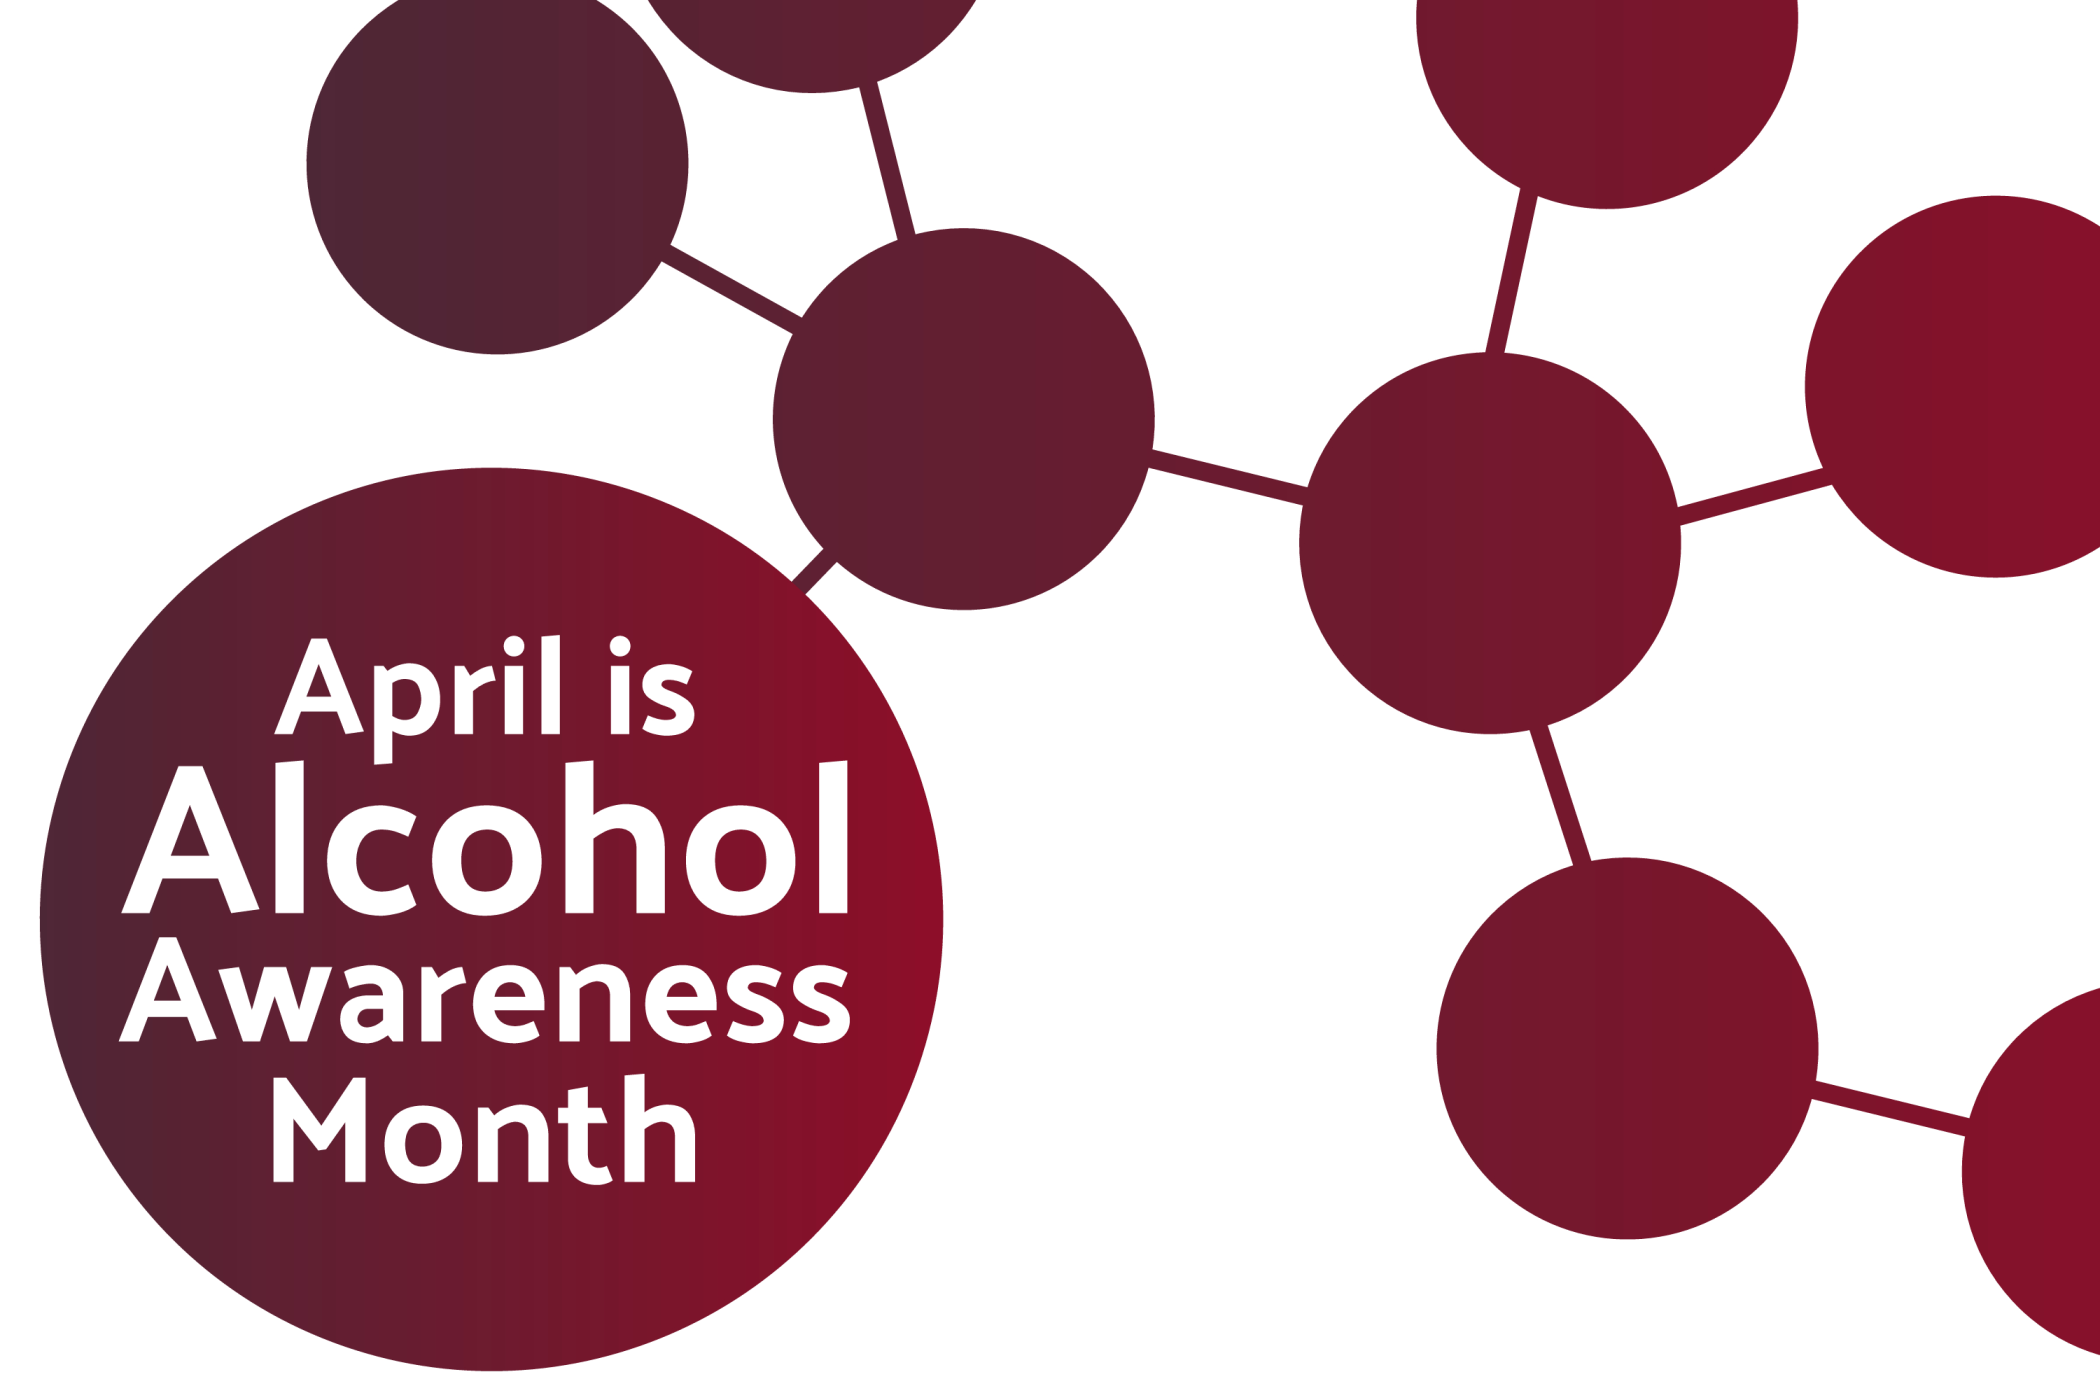 April is Alcohol Awareness Month: Here’s What to Know